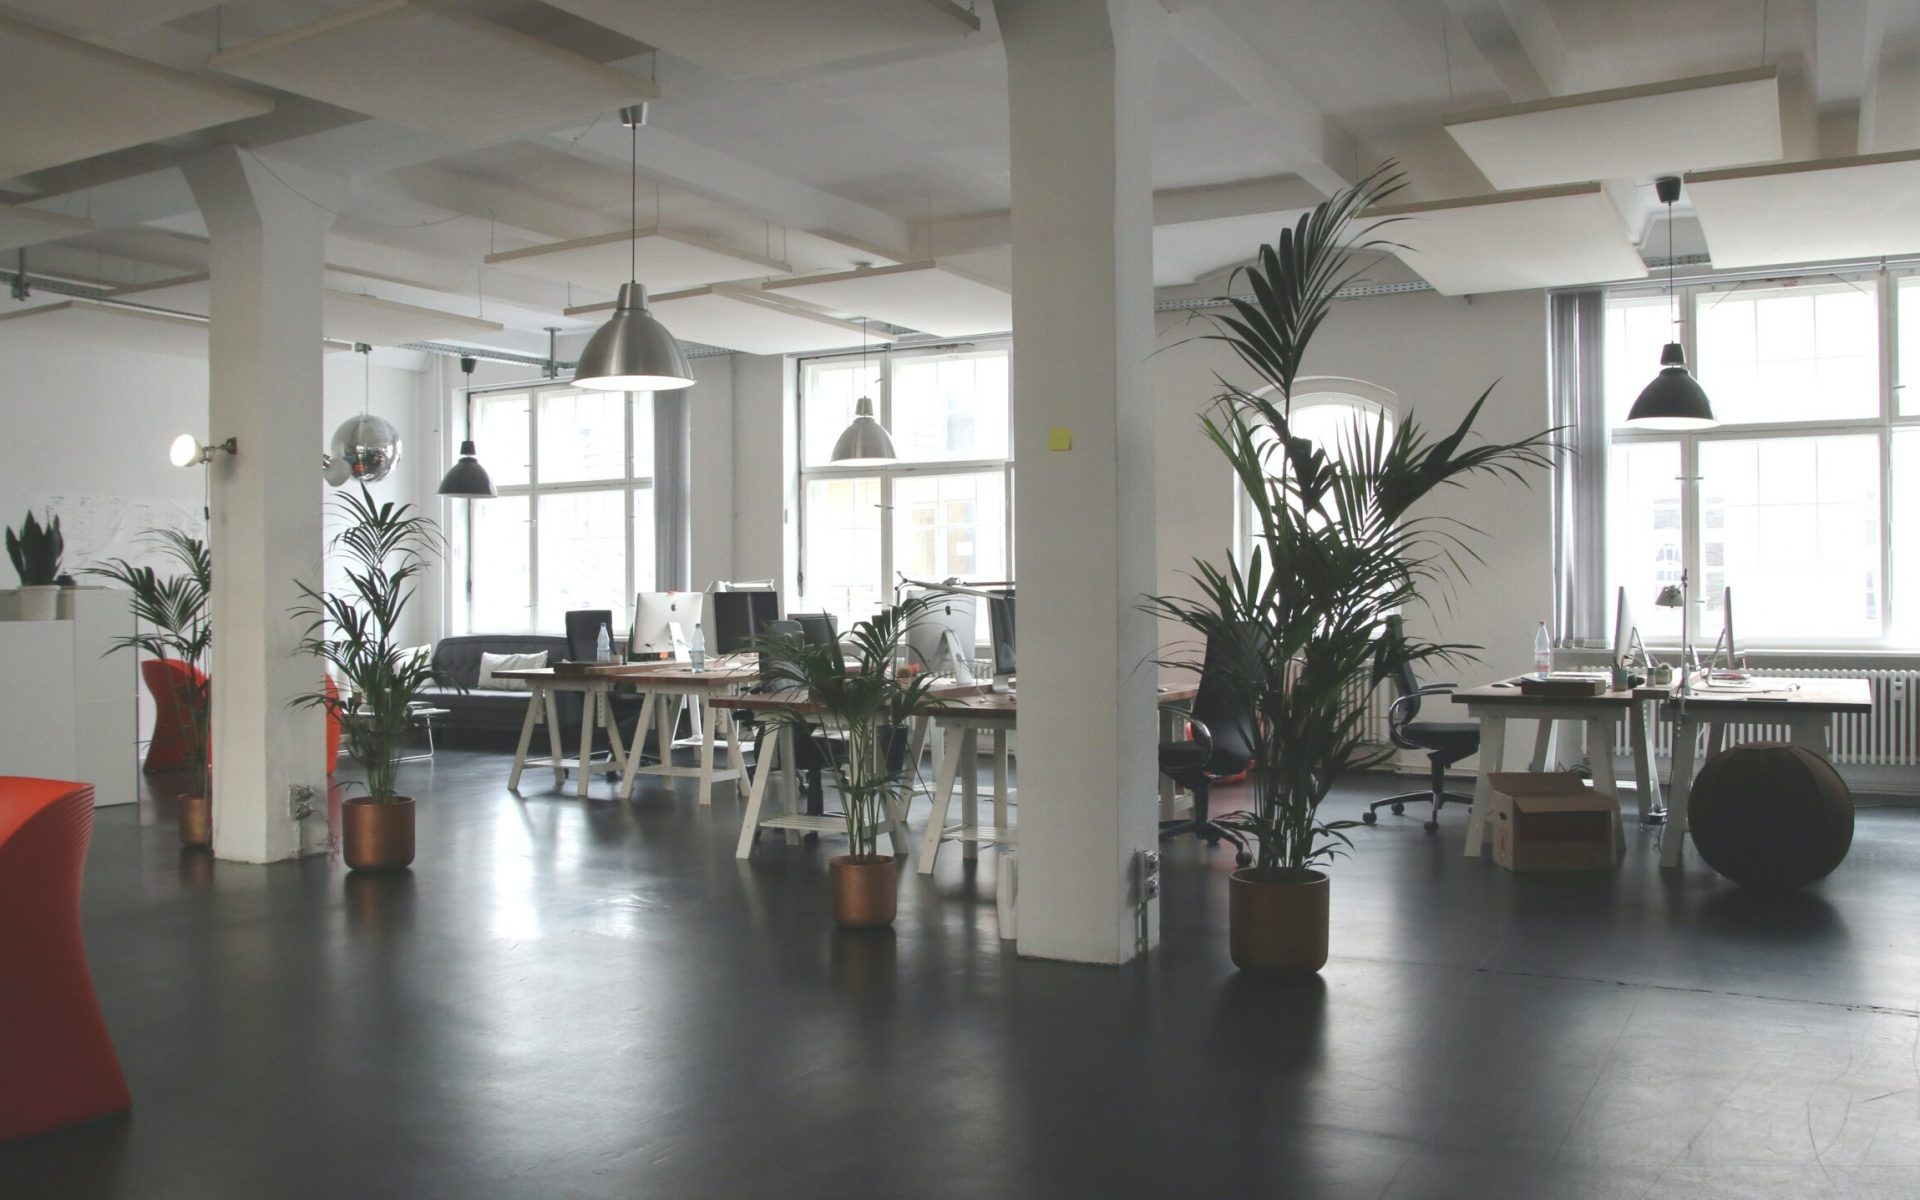 Industrial open office plan with some plants